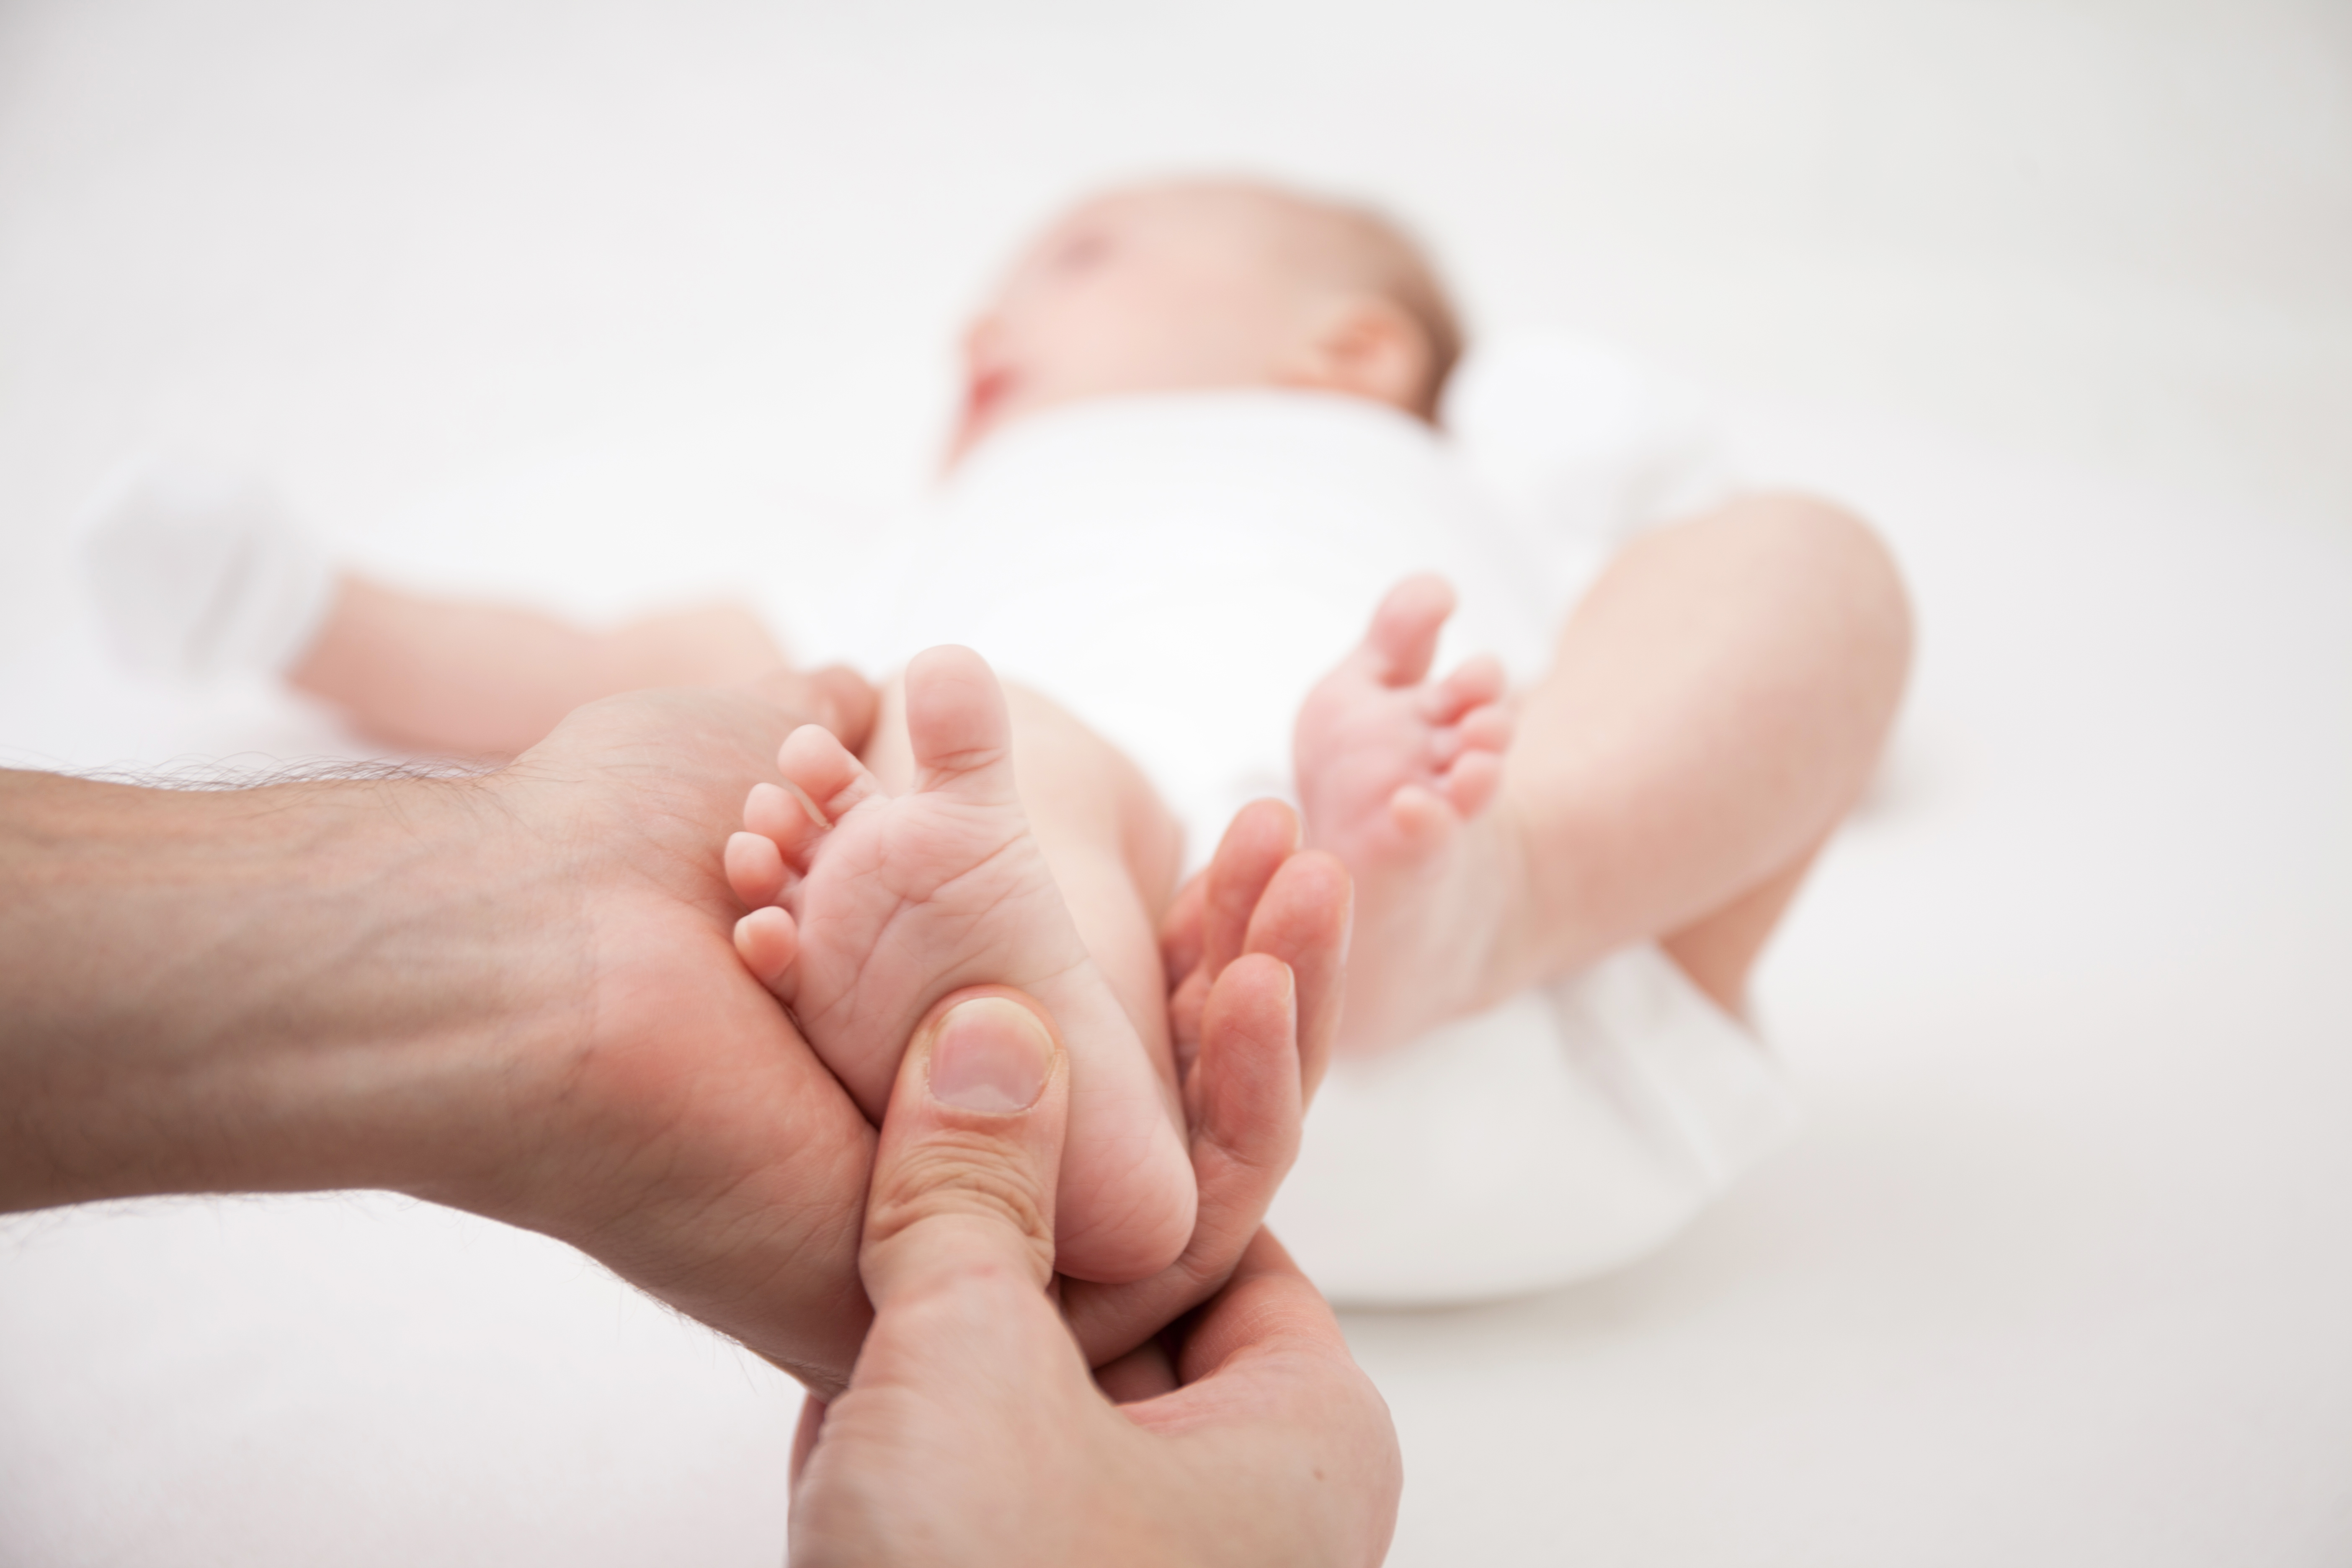 Baby’s feet: what are the most common foot abnormalities in babies?